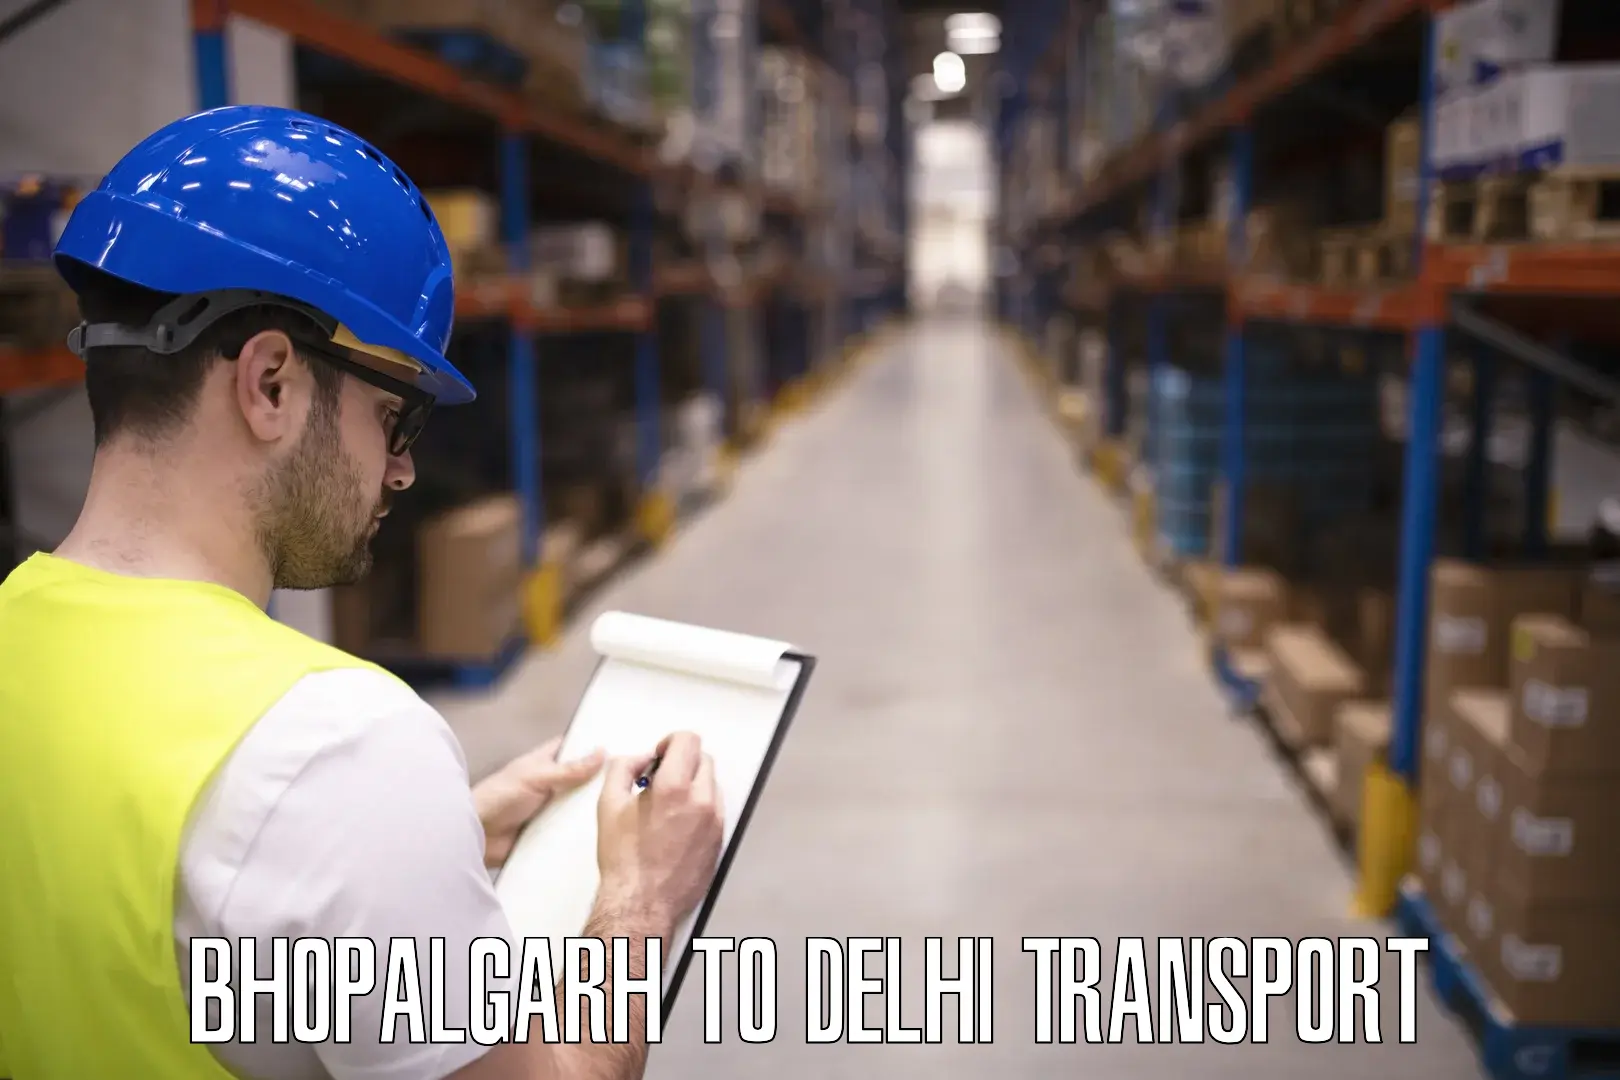 Shipping services Bhopalgarh to Lodhi Road